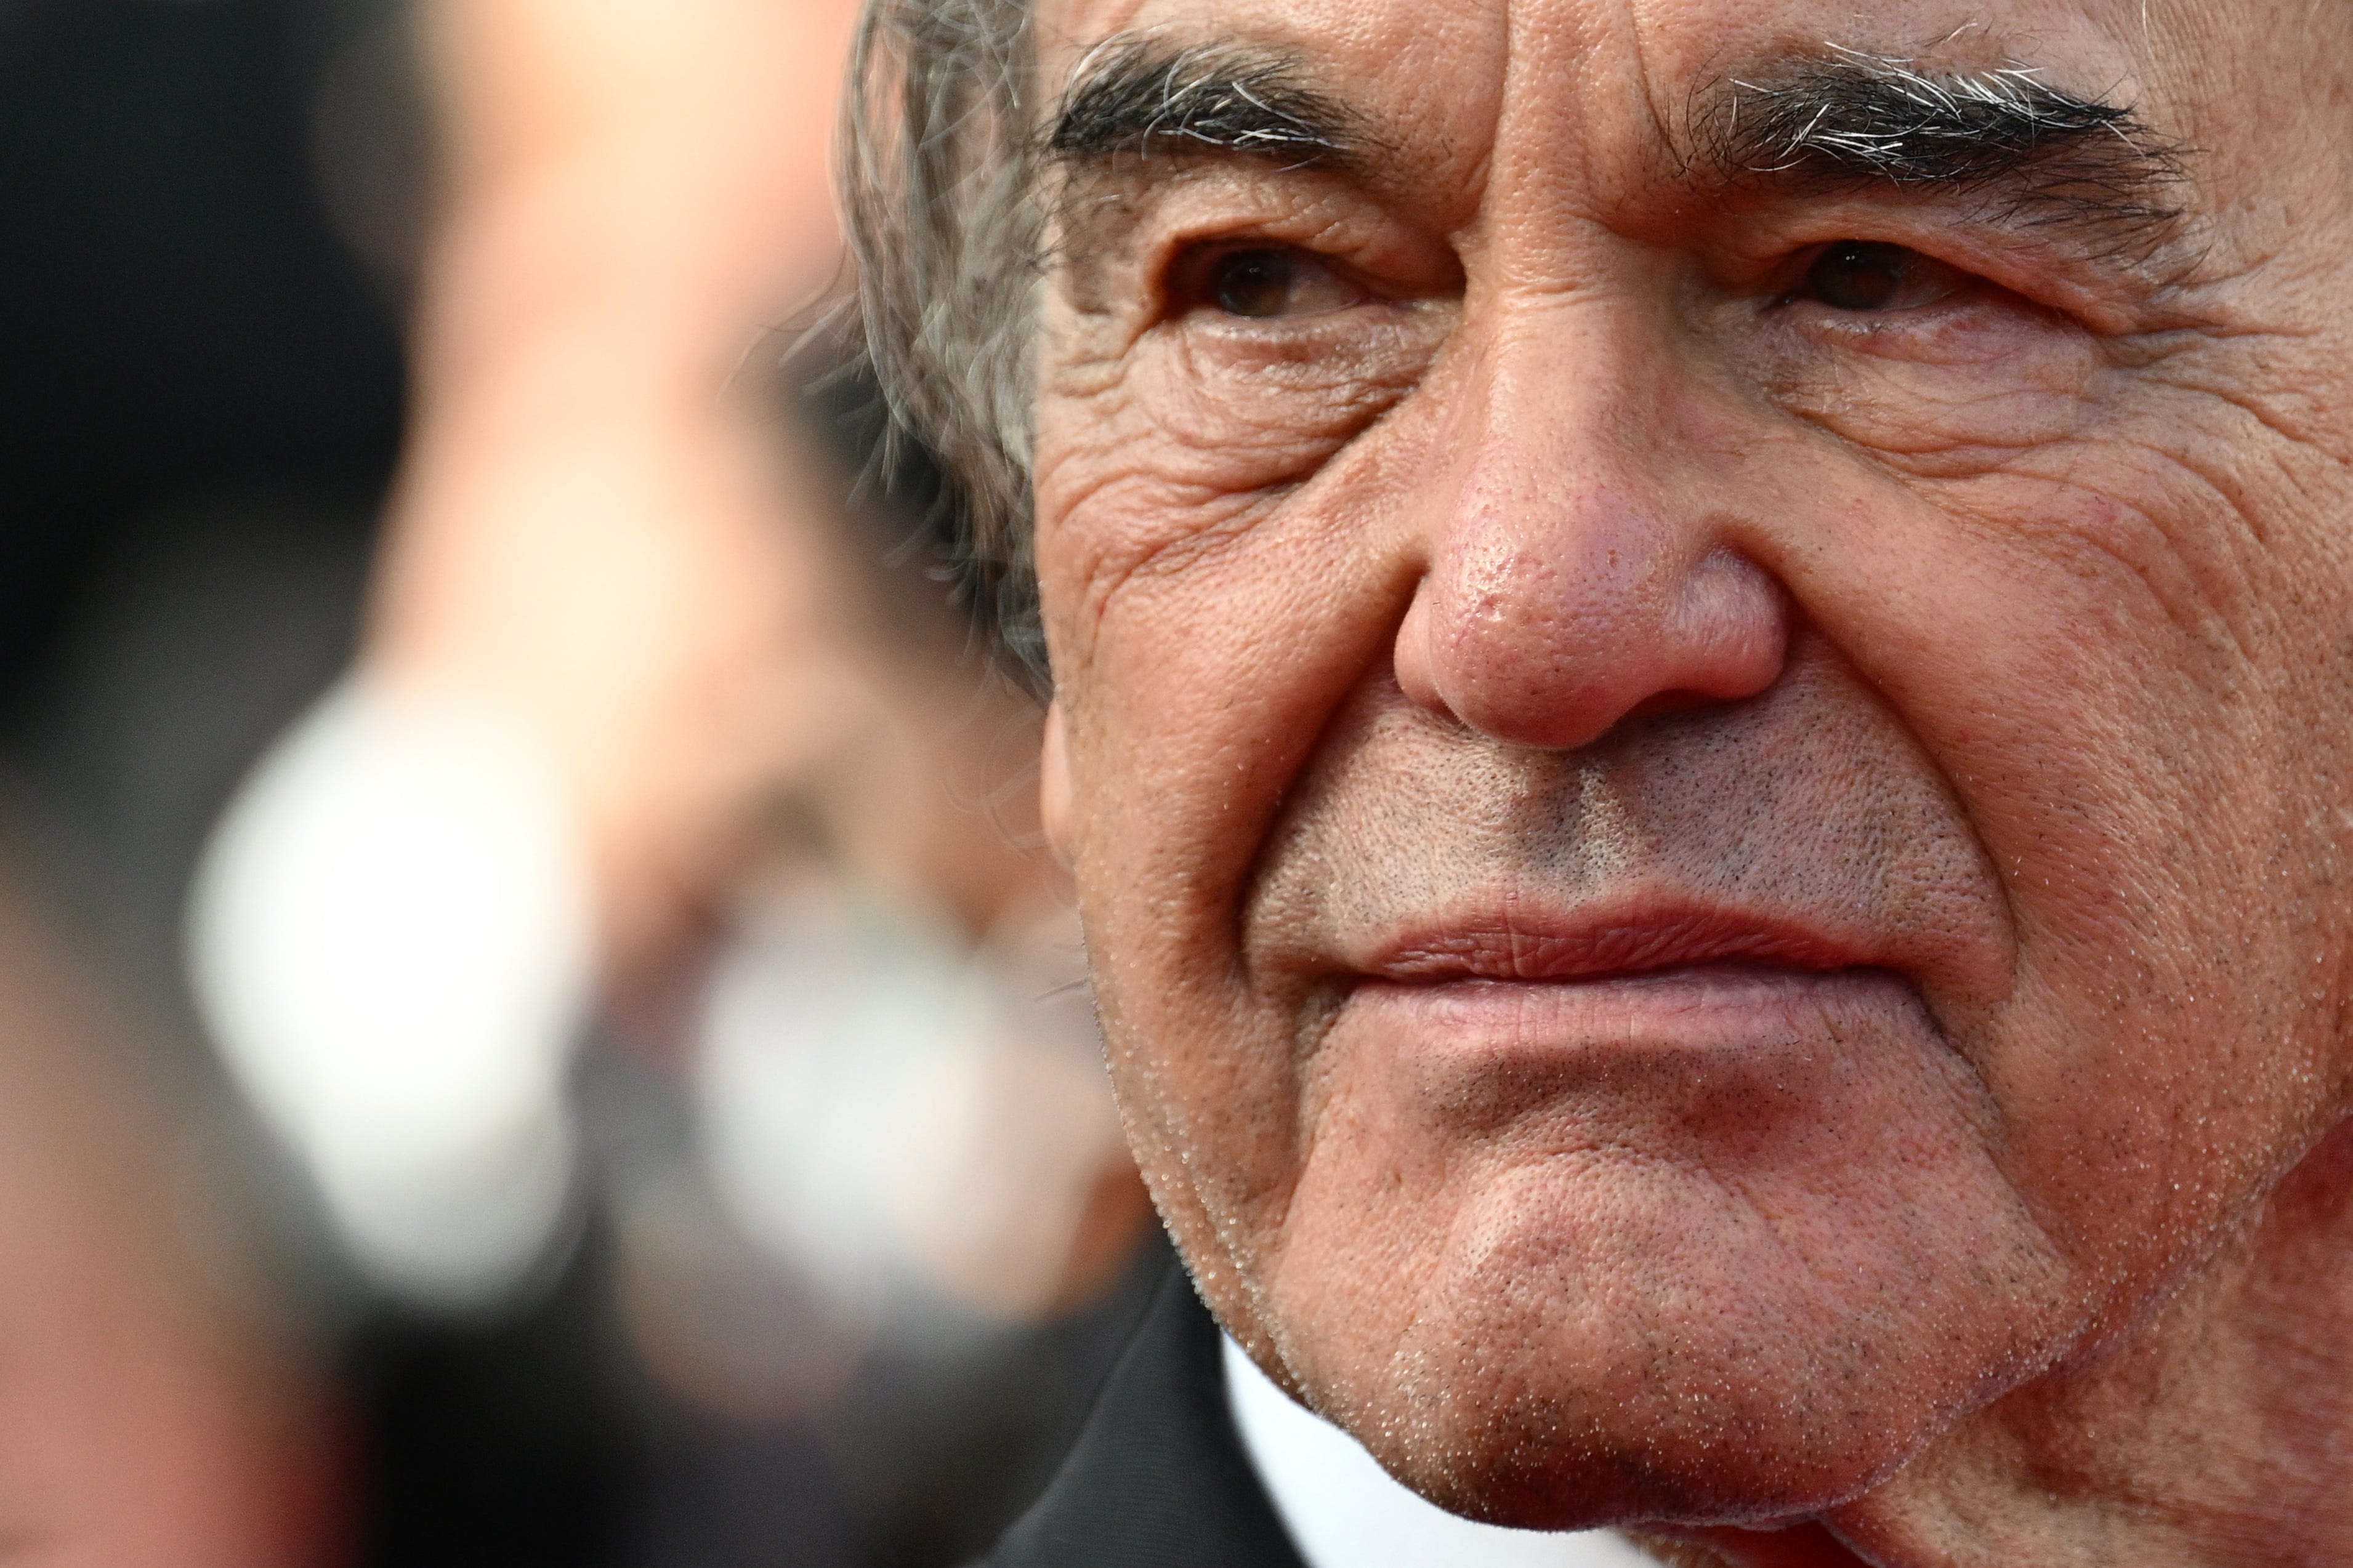 Oscar-winning director Oliver Stone to appear at Middlebury New Filmmakers Festival